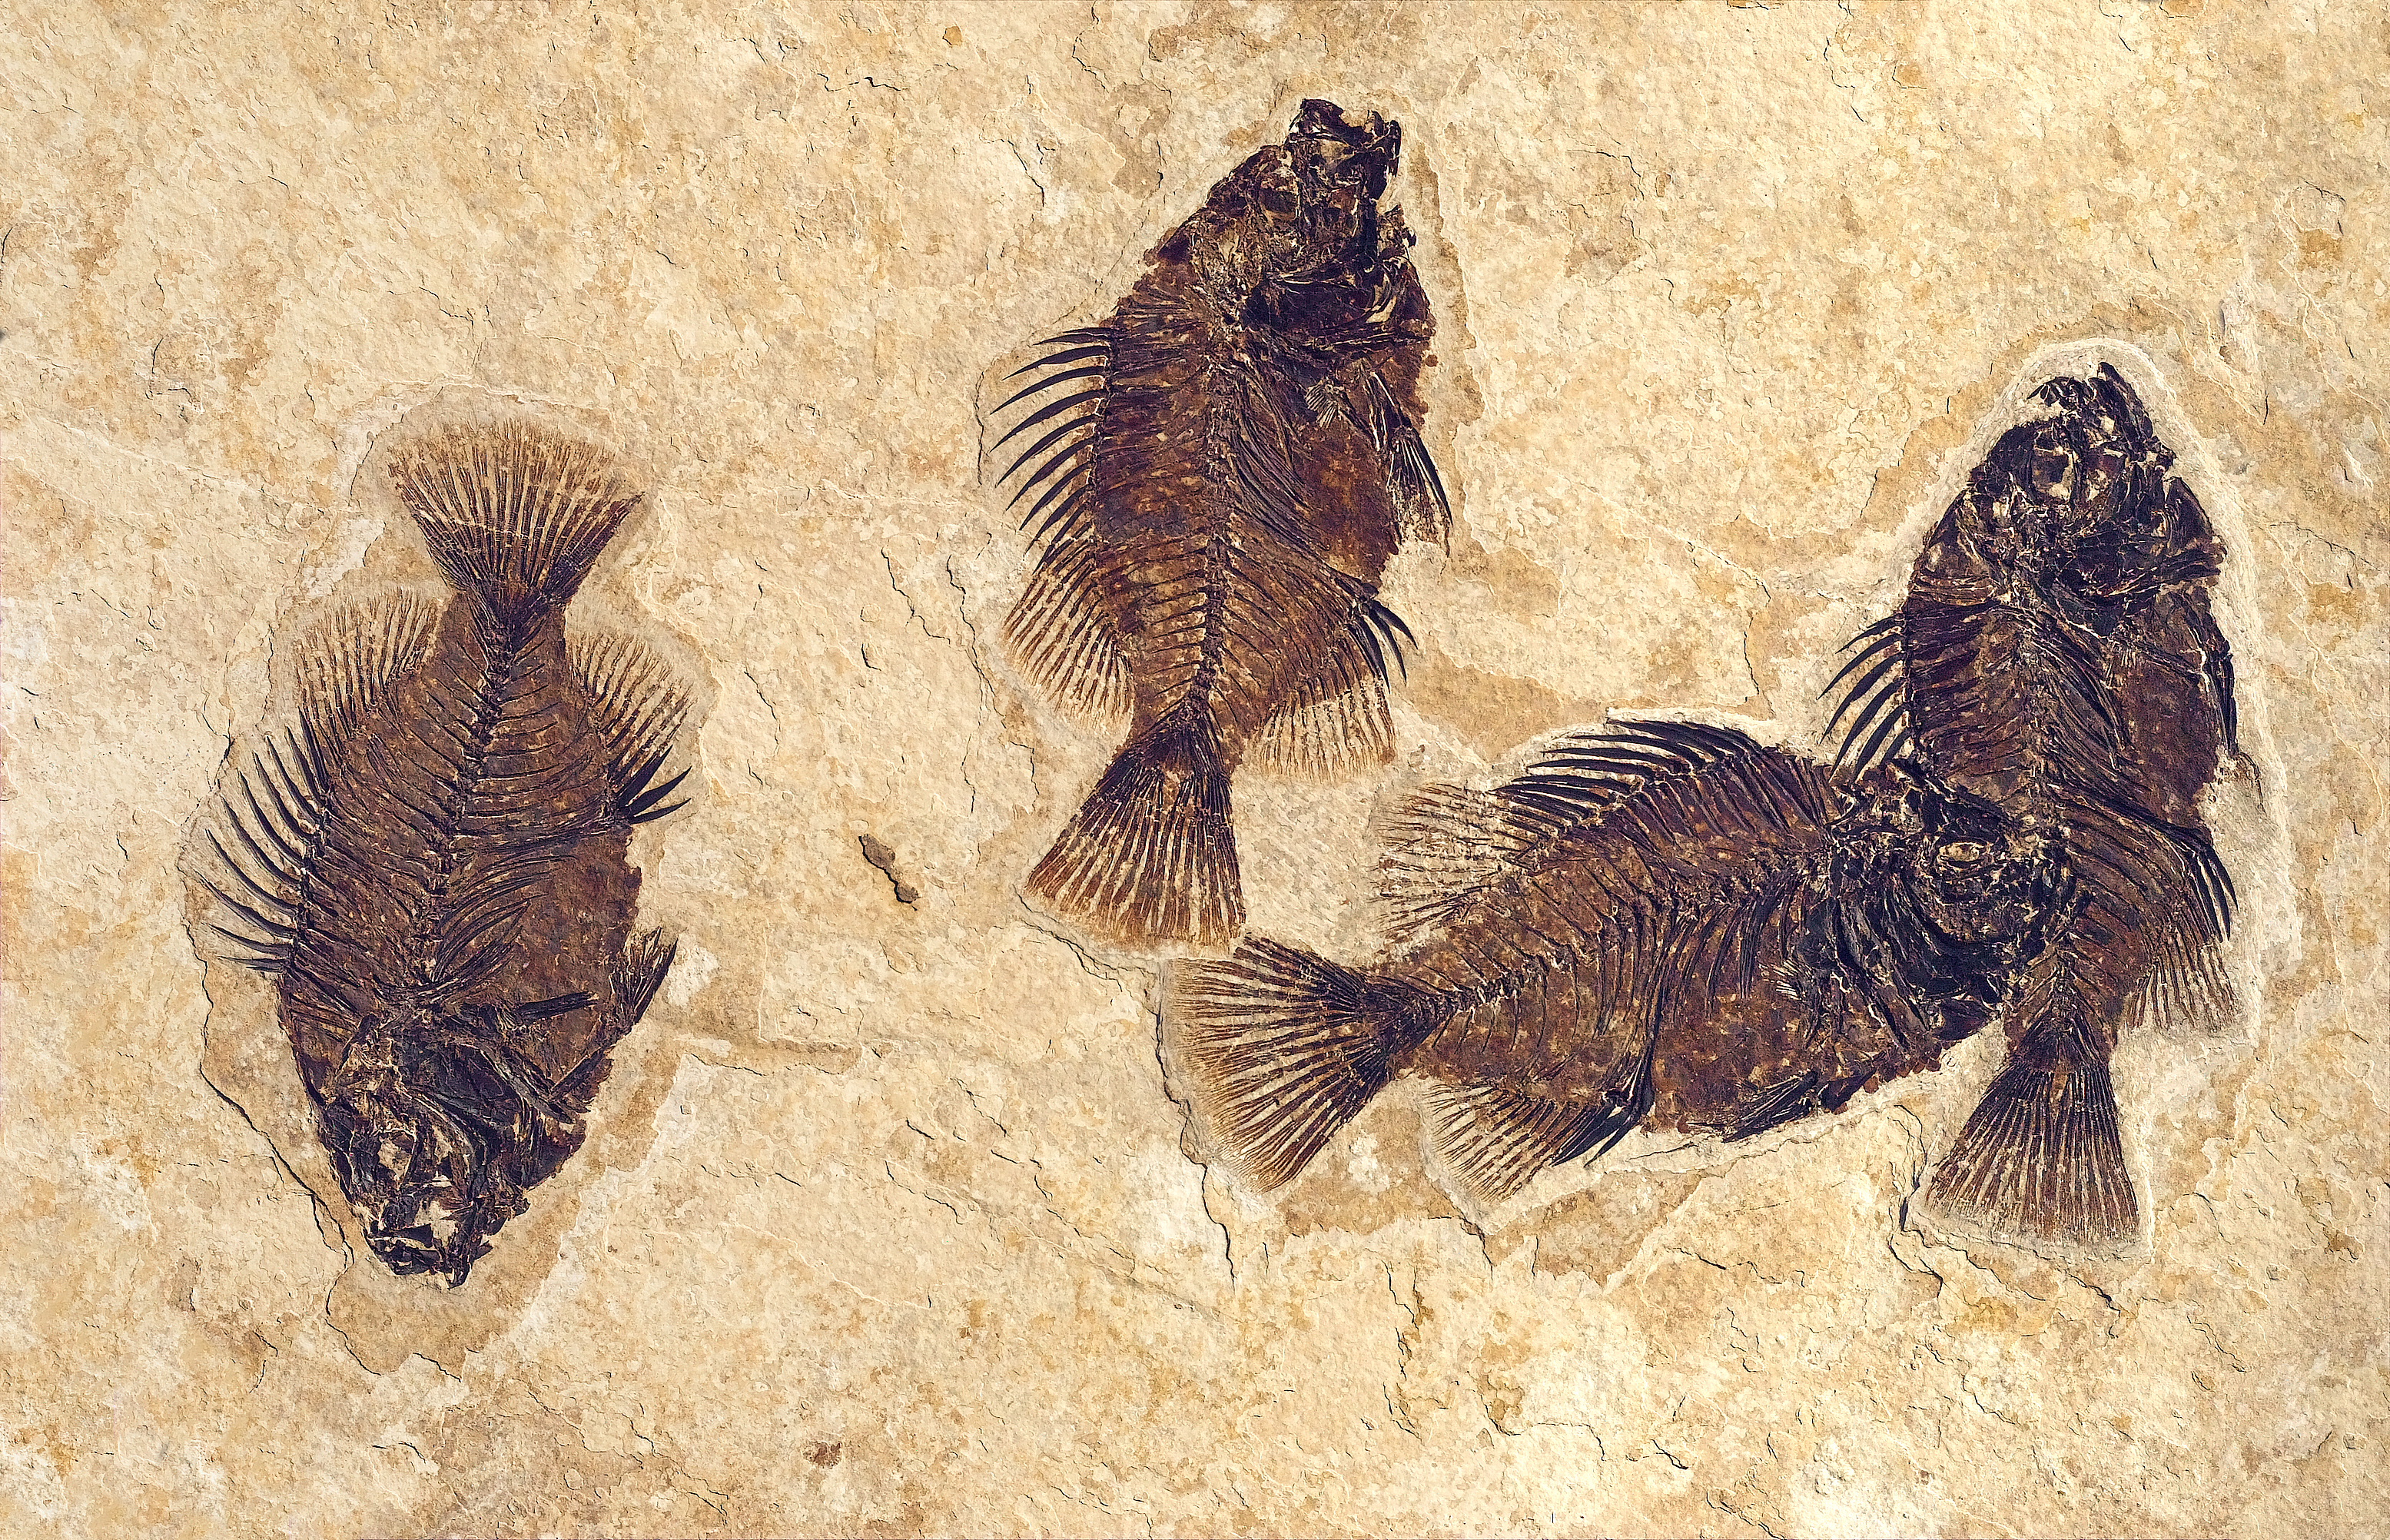 a well preserved fossil fish, Cockerellites liops